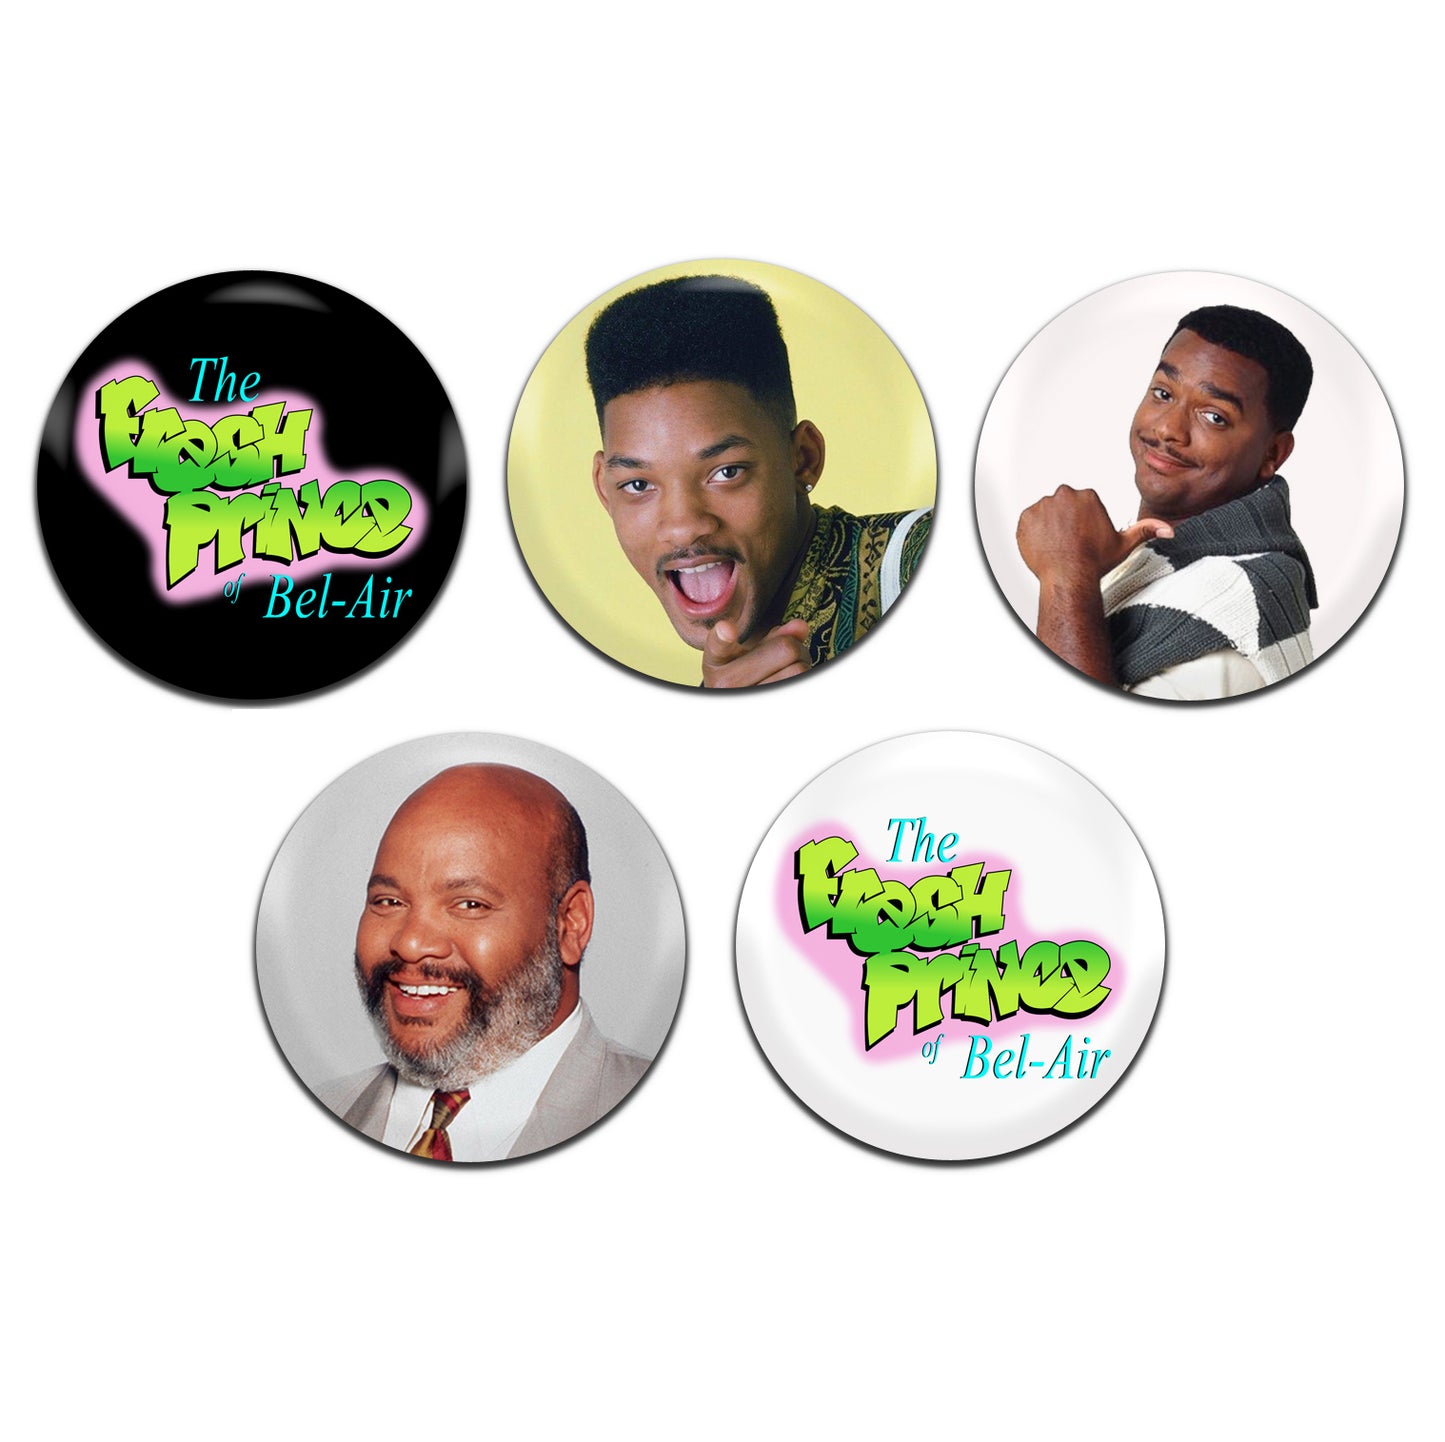 Fresh Prince Of Bel Air Kids TV 80's 90's 25mm / 1 Inch D-Pin Button Badges (5x Set)